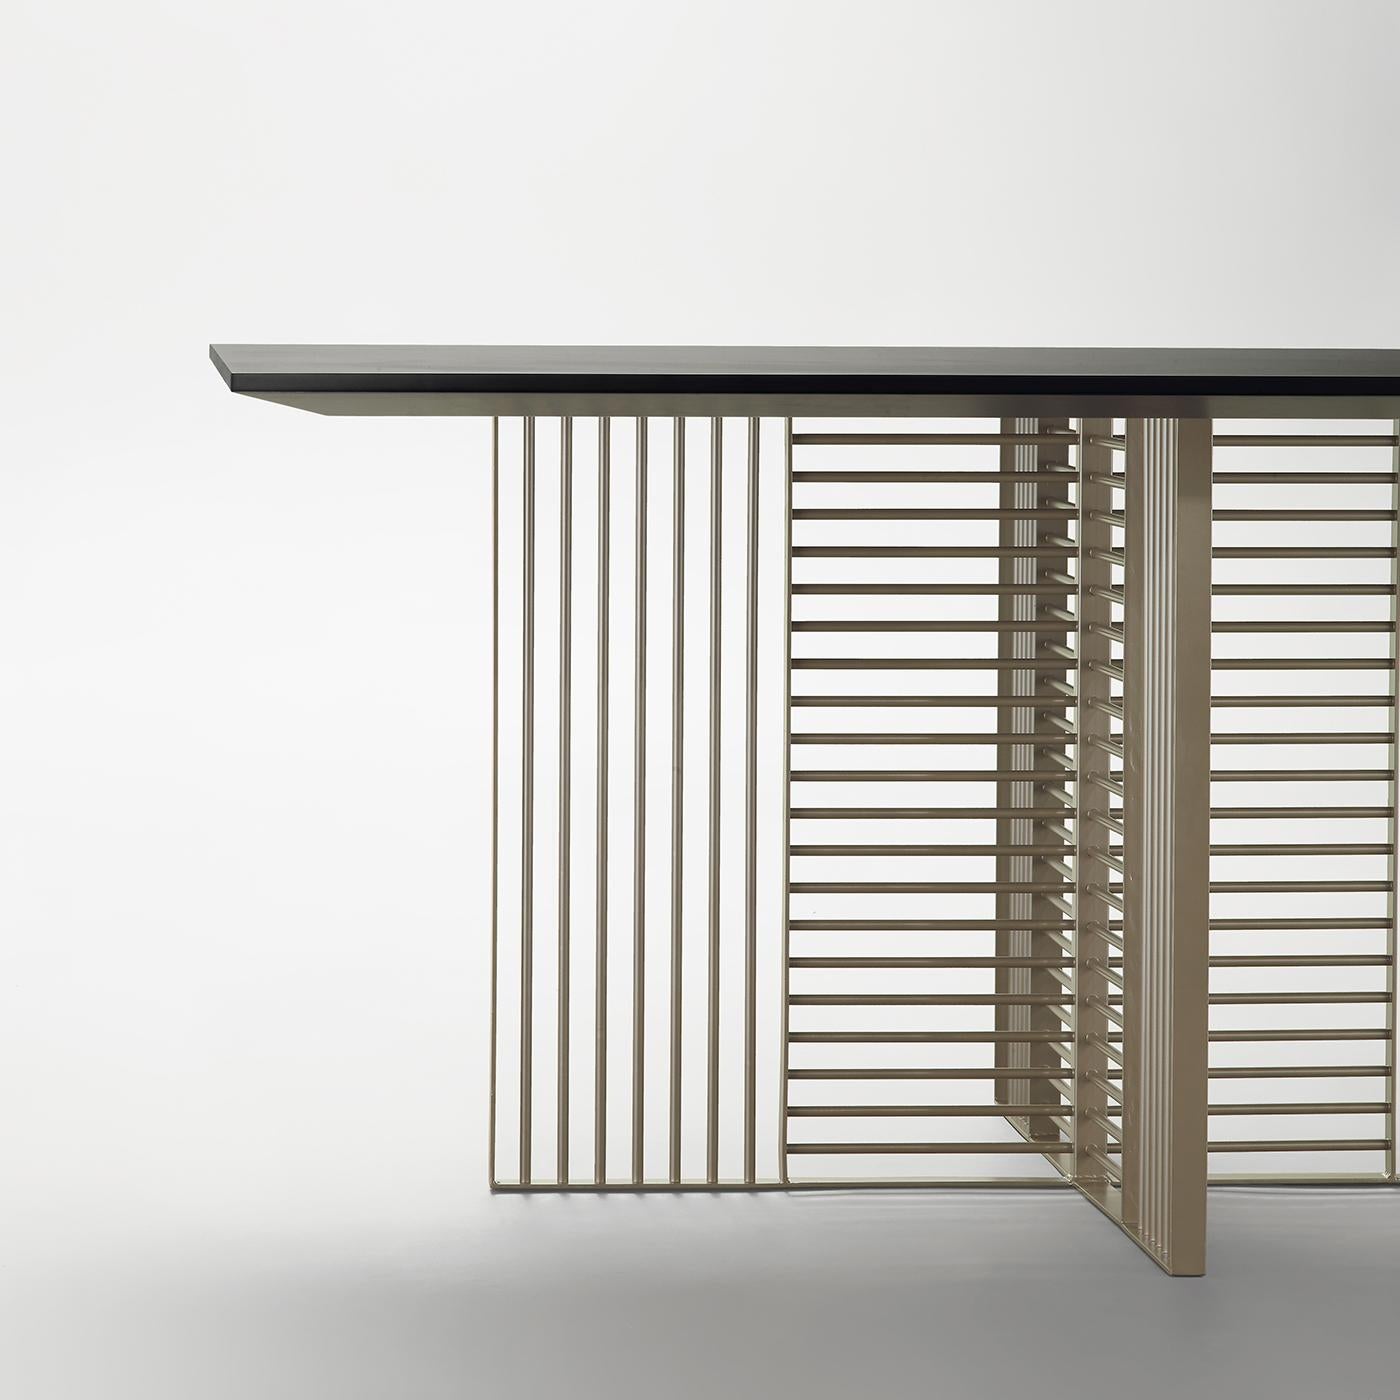 The laser-cut tubular steel base of this dining table creates a striking geometric pattern of vertical and horizontal lines that supports a rectangular MDF top. Designed for indoor decors, this table is also available for customization that makes it